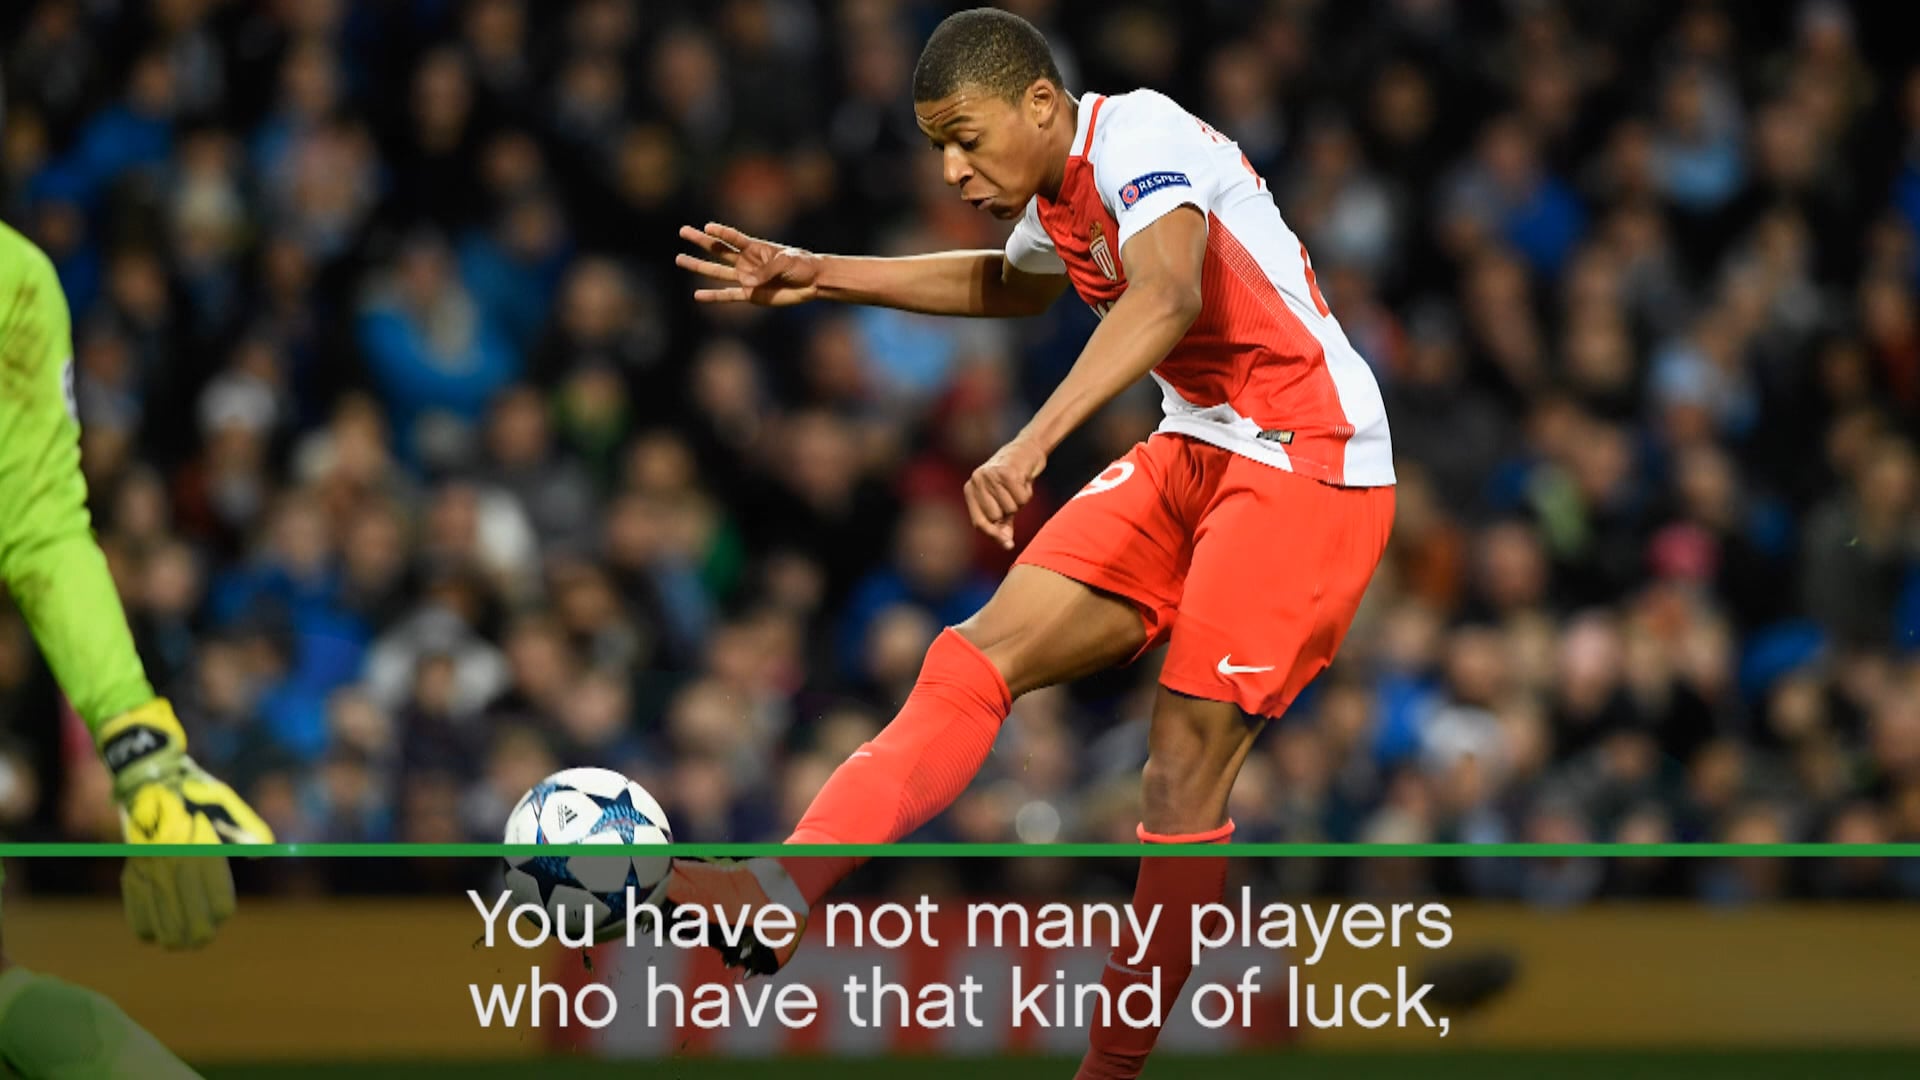 It's up to Mbappe whether he chooses Arsenal on Vimeo